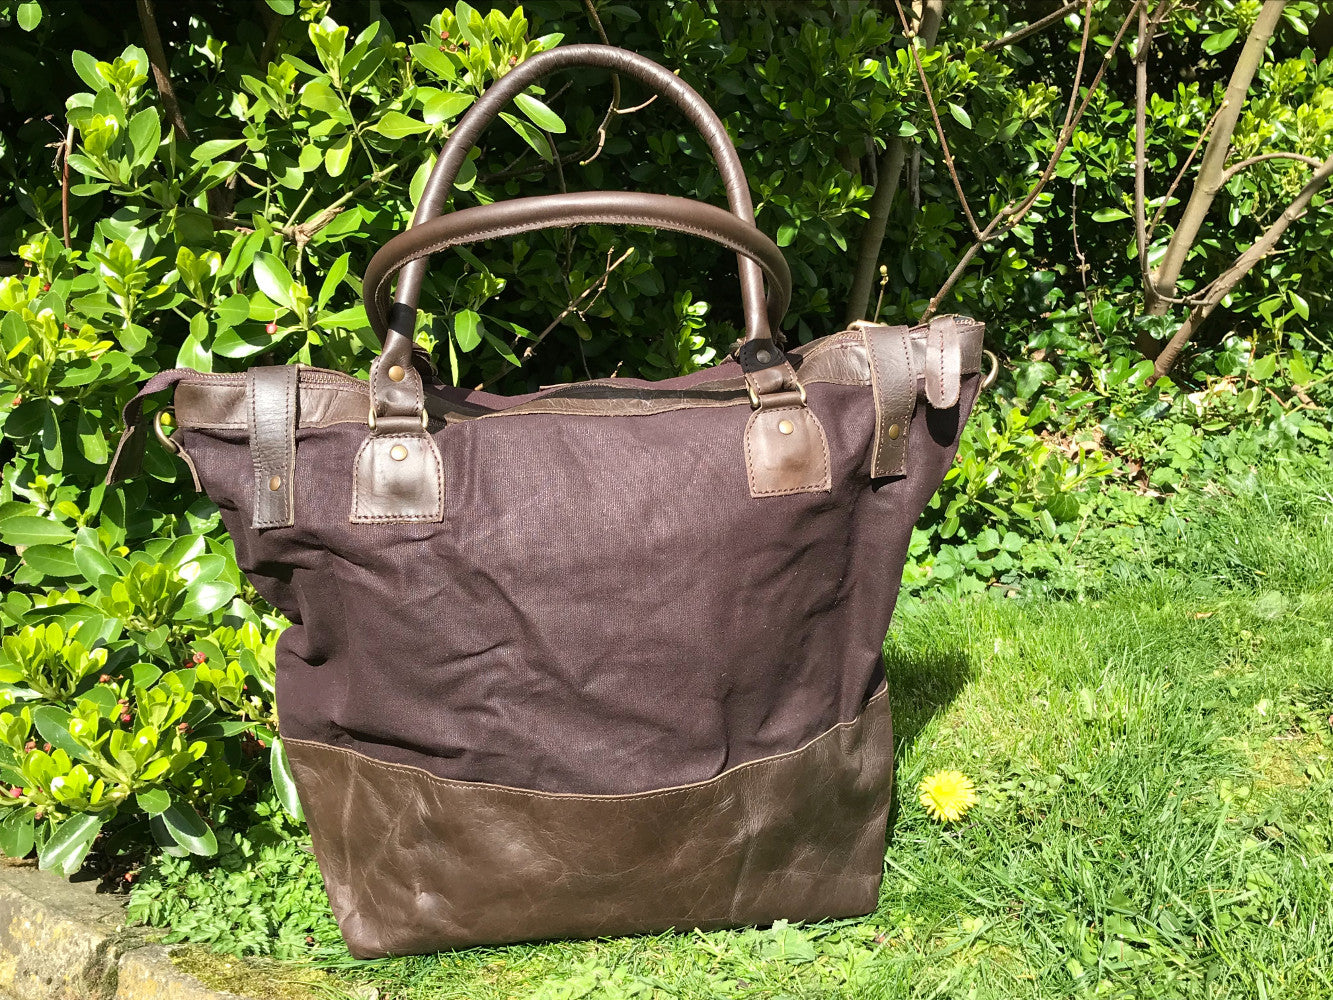 The Bingham.  A classic zipped tote bag by Burghley Bags.  Handmade from eco-friendly vegetable tanned leather and strong cotton canvas, with a leather shoulder strap.  Shown in stylish dark brown.